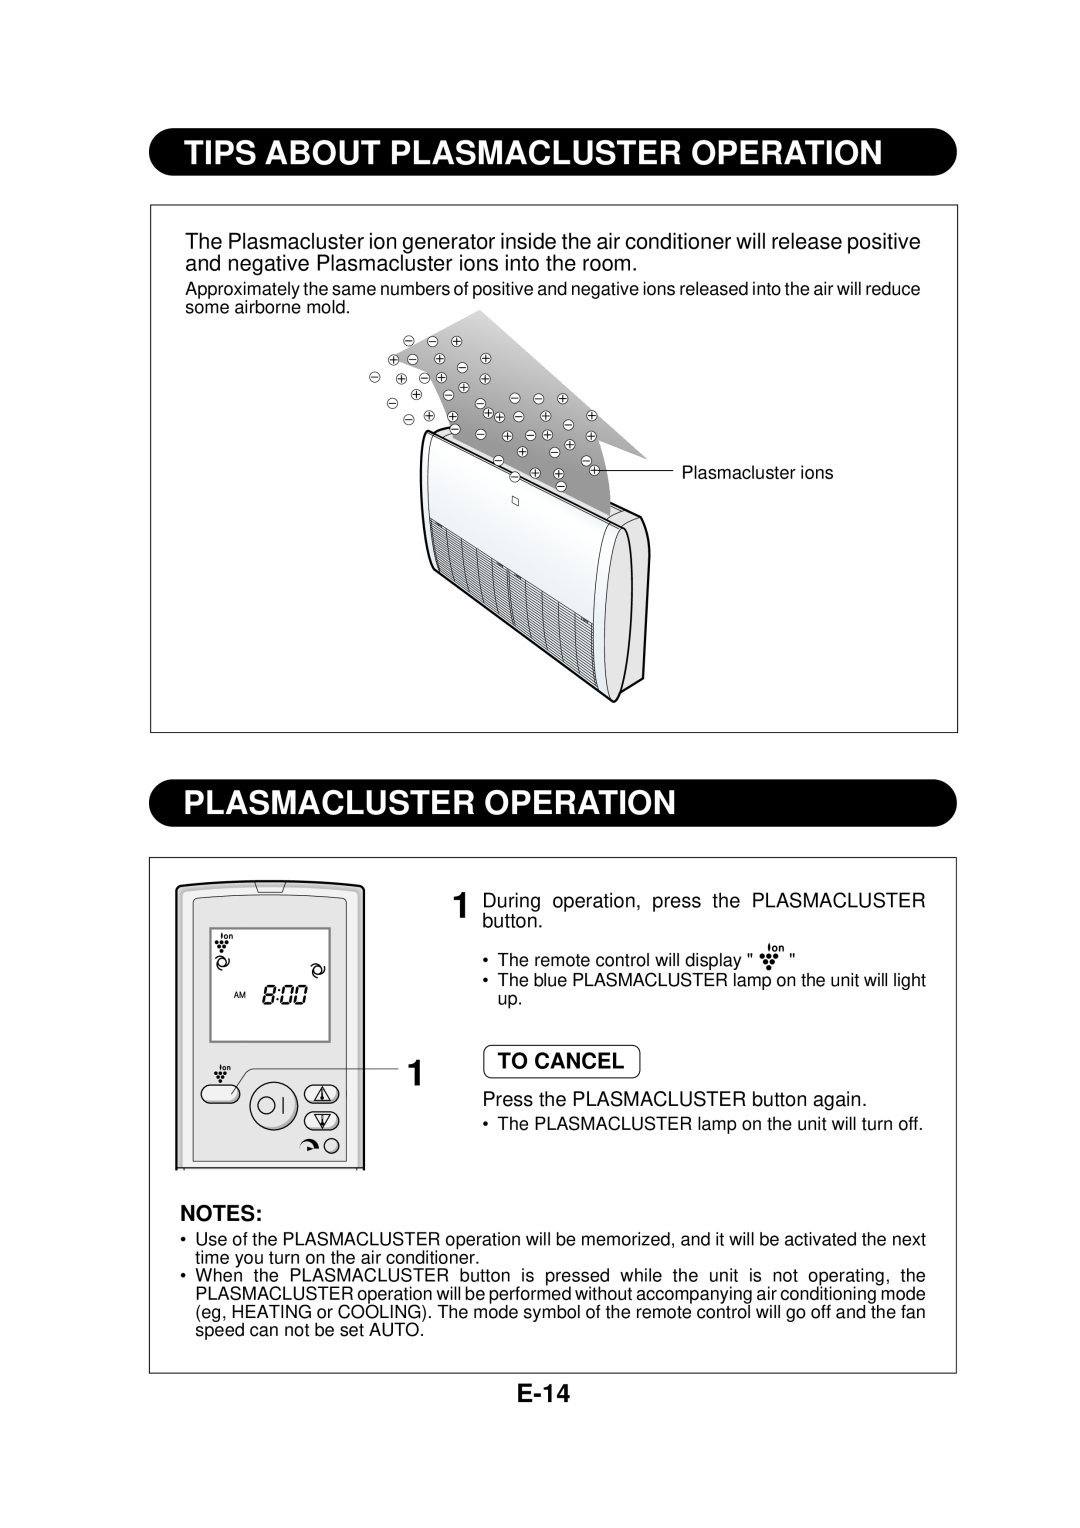 Sharp GS-XP18FR, GS-XP07FR, GS-XP09FR, GS-XP27FR, GS-XP24FR, GS-XP12FR operation manual Tips About Plasmacluster Operation, E-14 